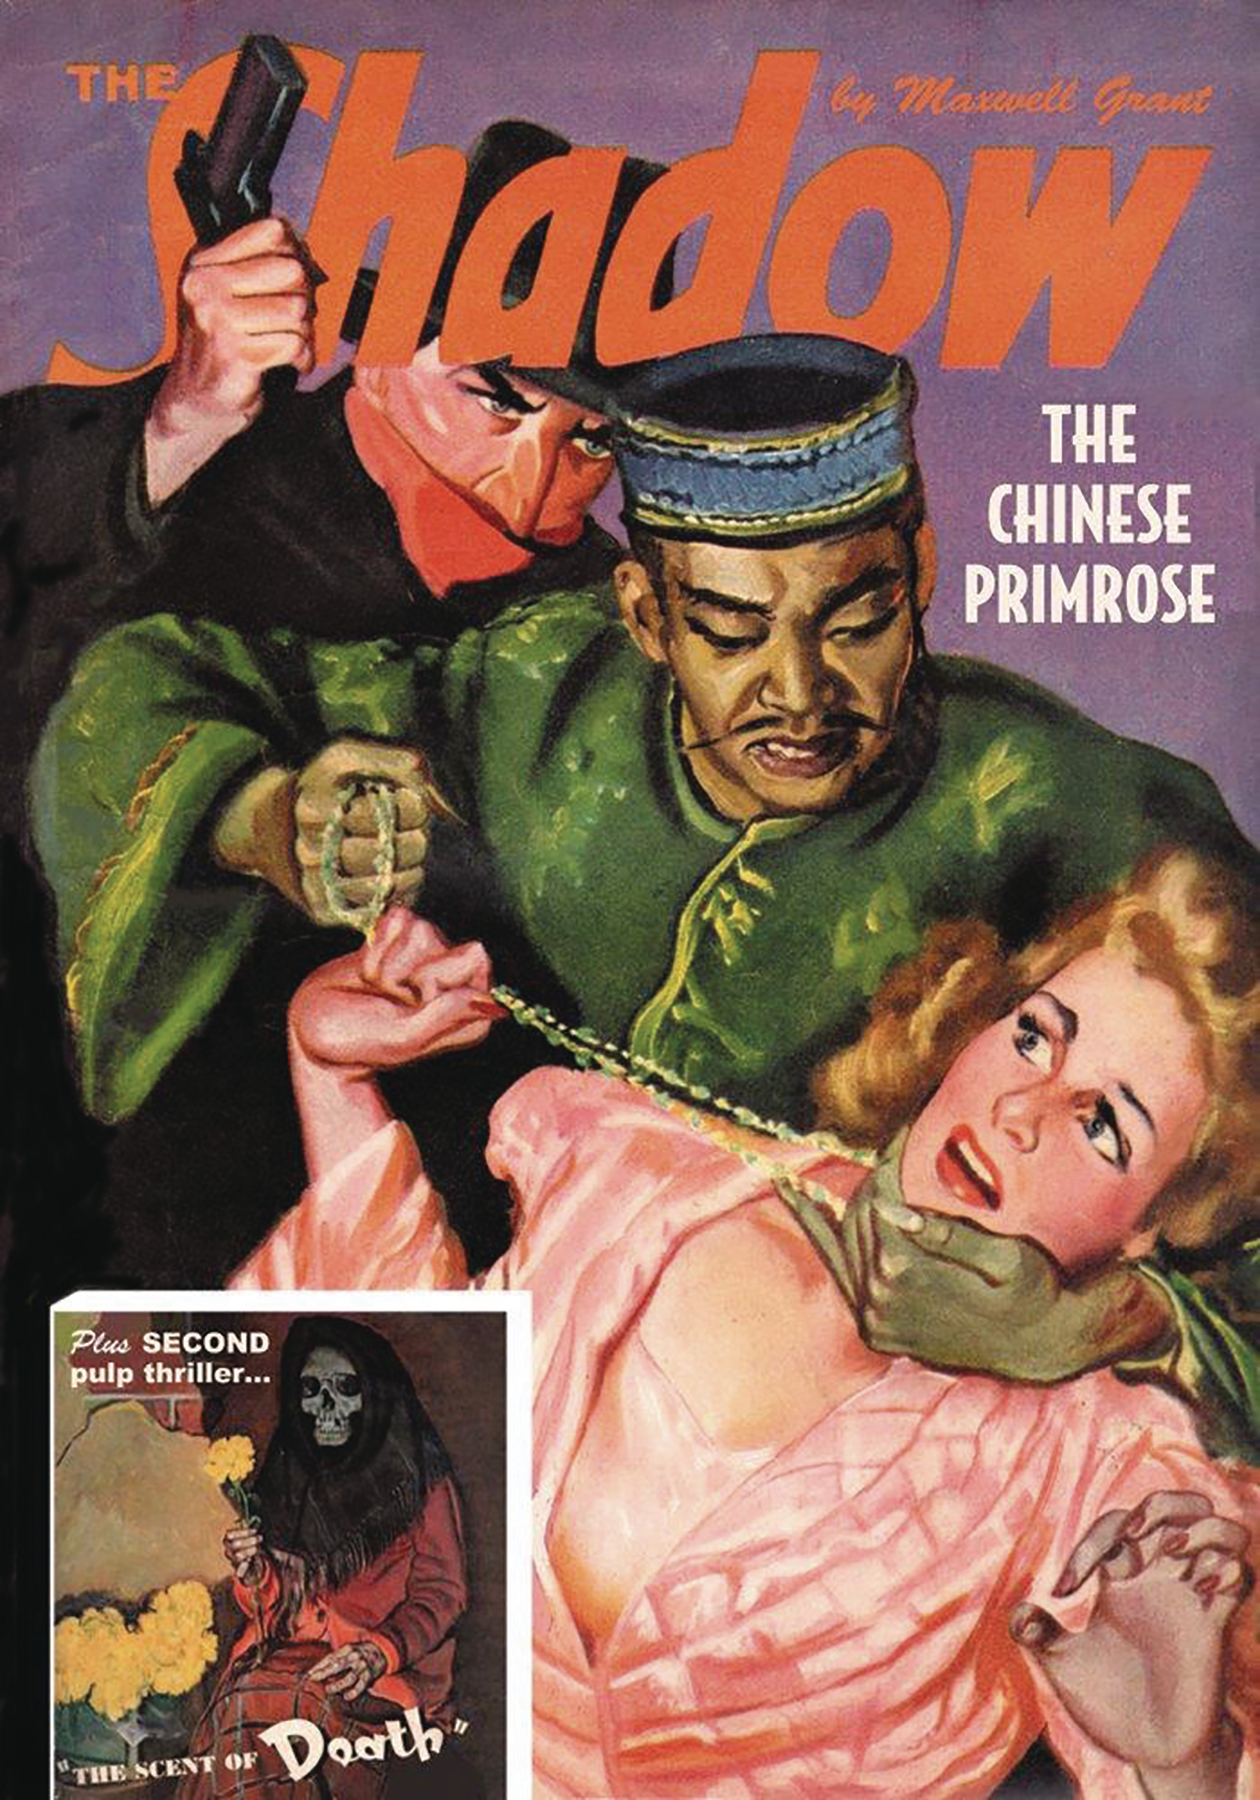 SHADOW DOUBLE NOVEL VOL 126 SCENT OF DEATH & CHINESE PRIMROS